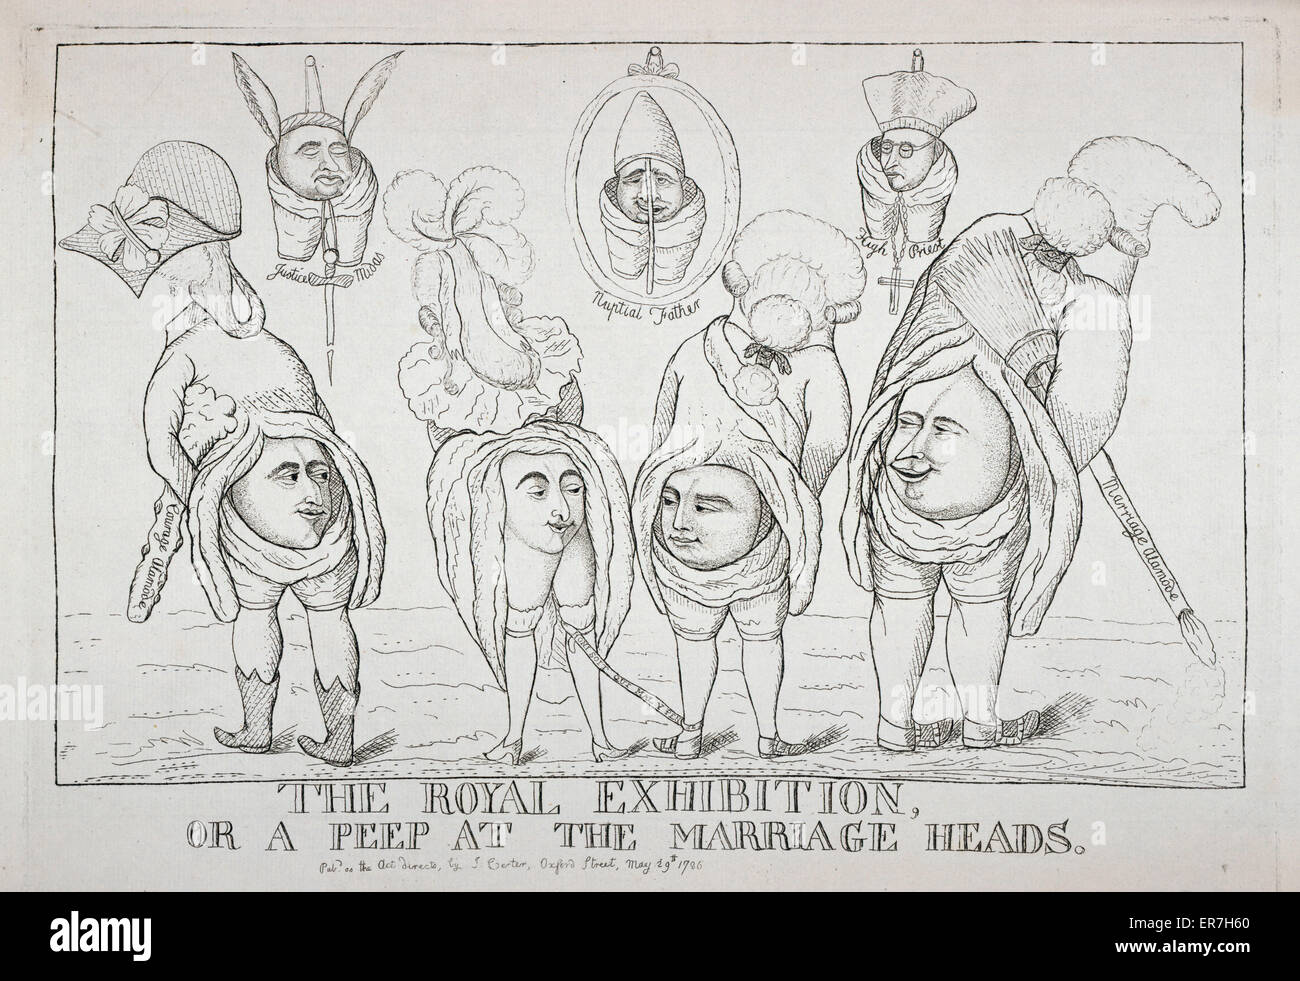 The royal exhibition, or a peep at the marriage heads Stock Photo